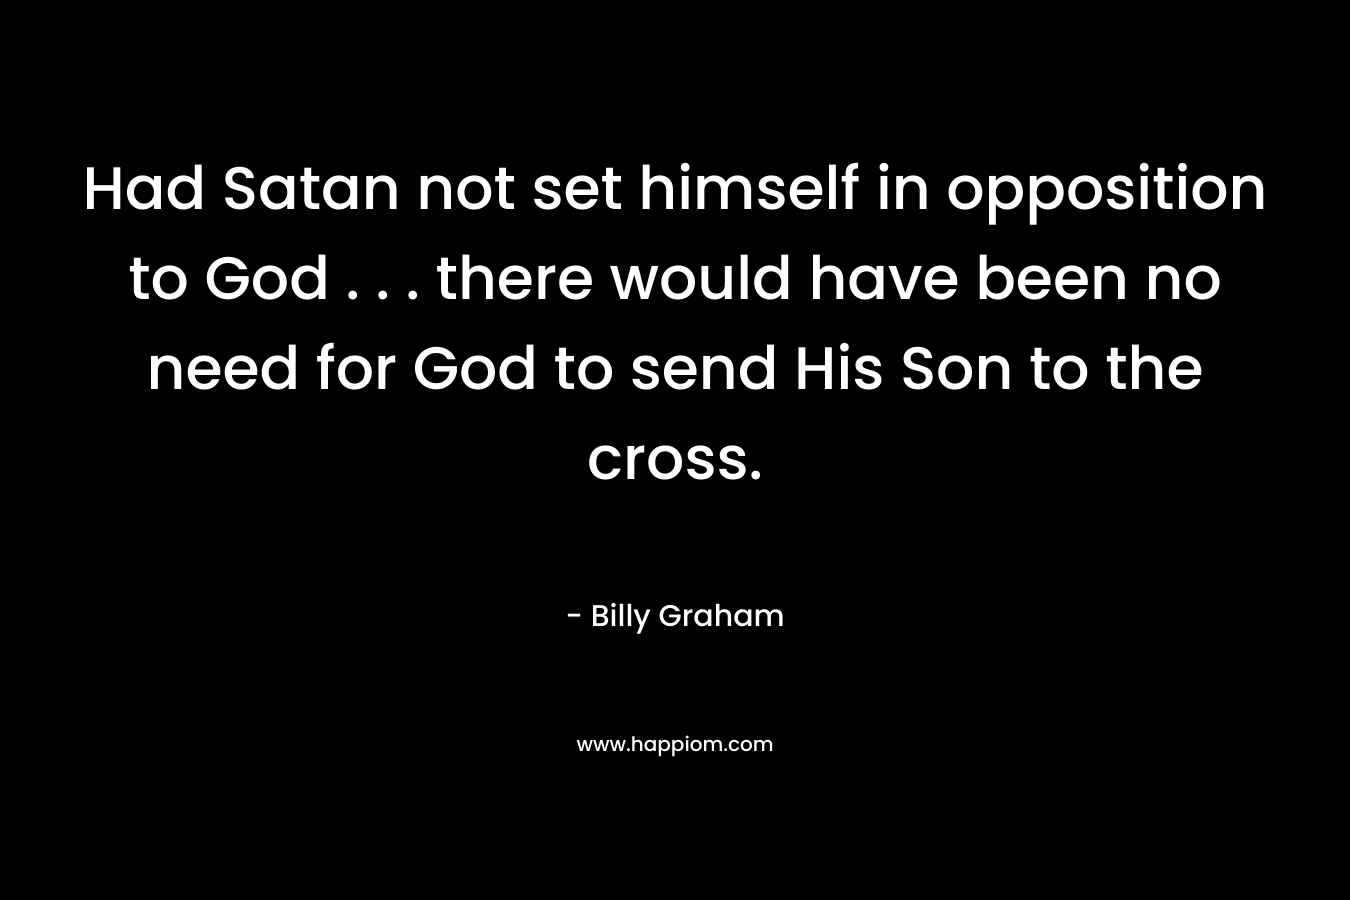 Had Satan not set himself in opposition to God . . . there would have been no need for God to send His Son to the cross.